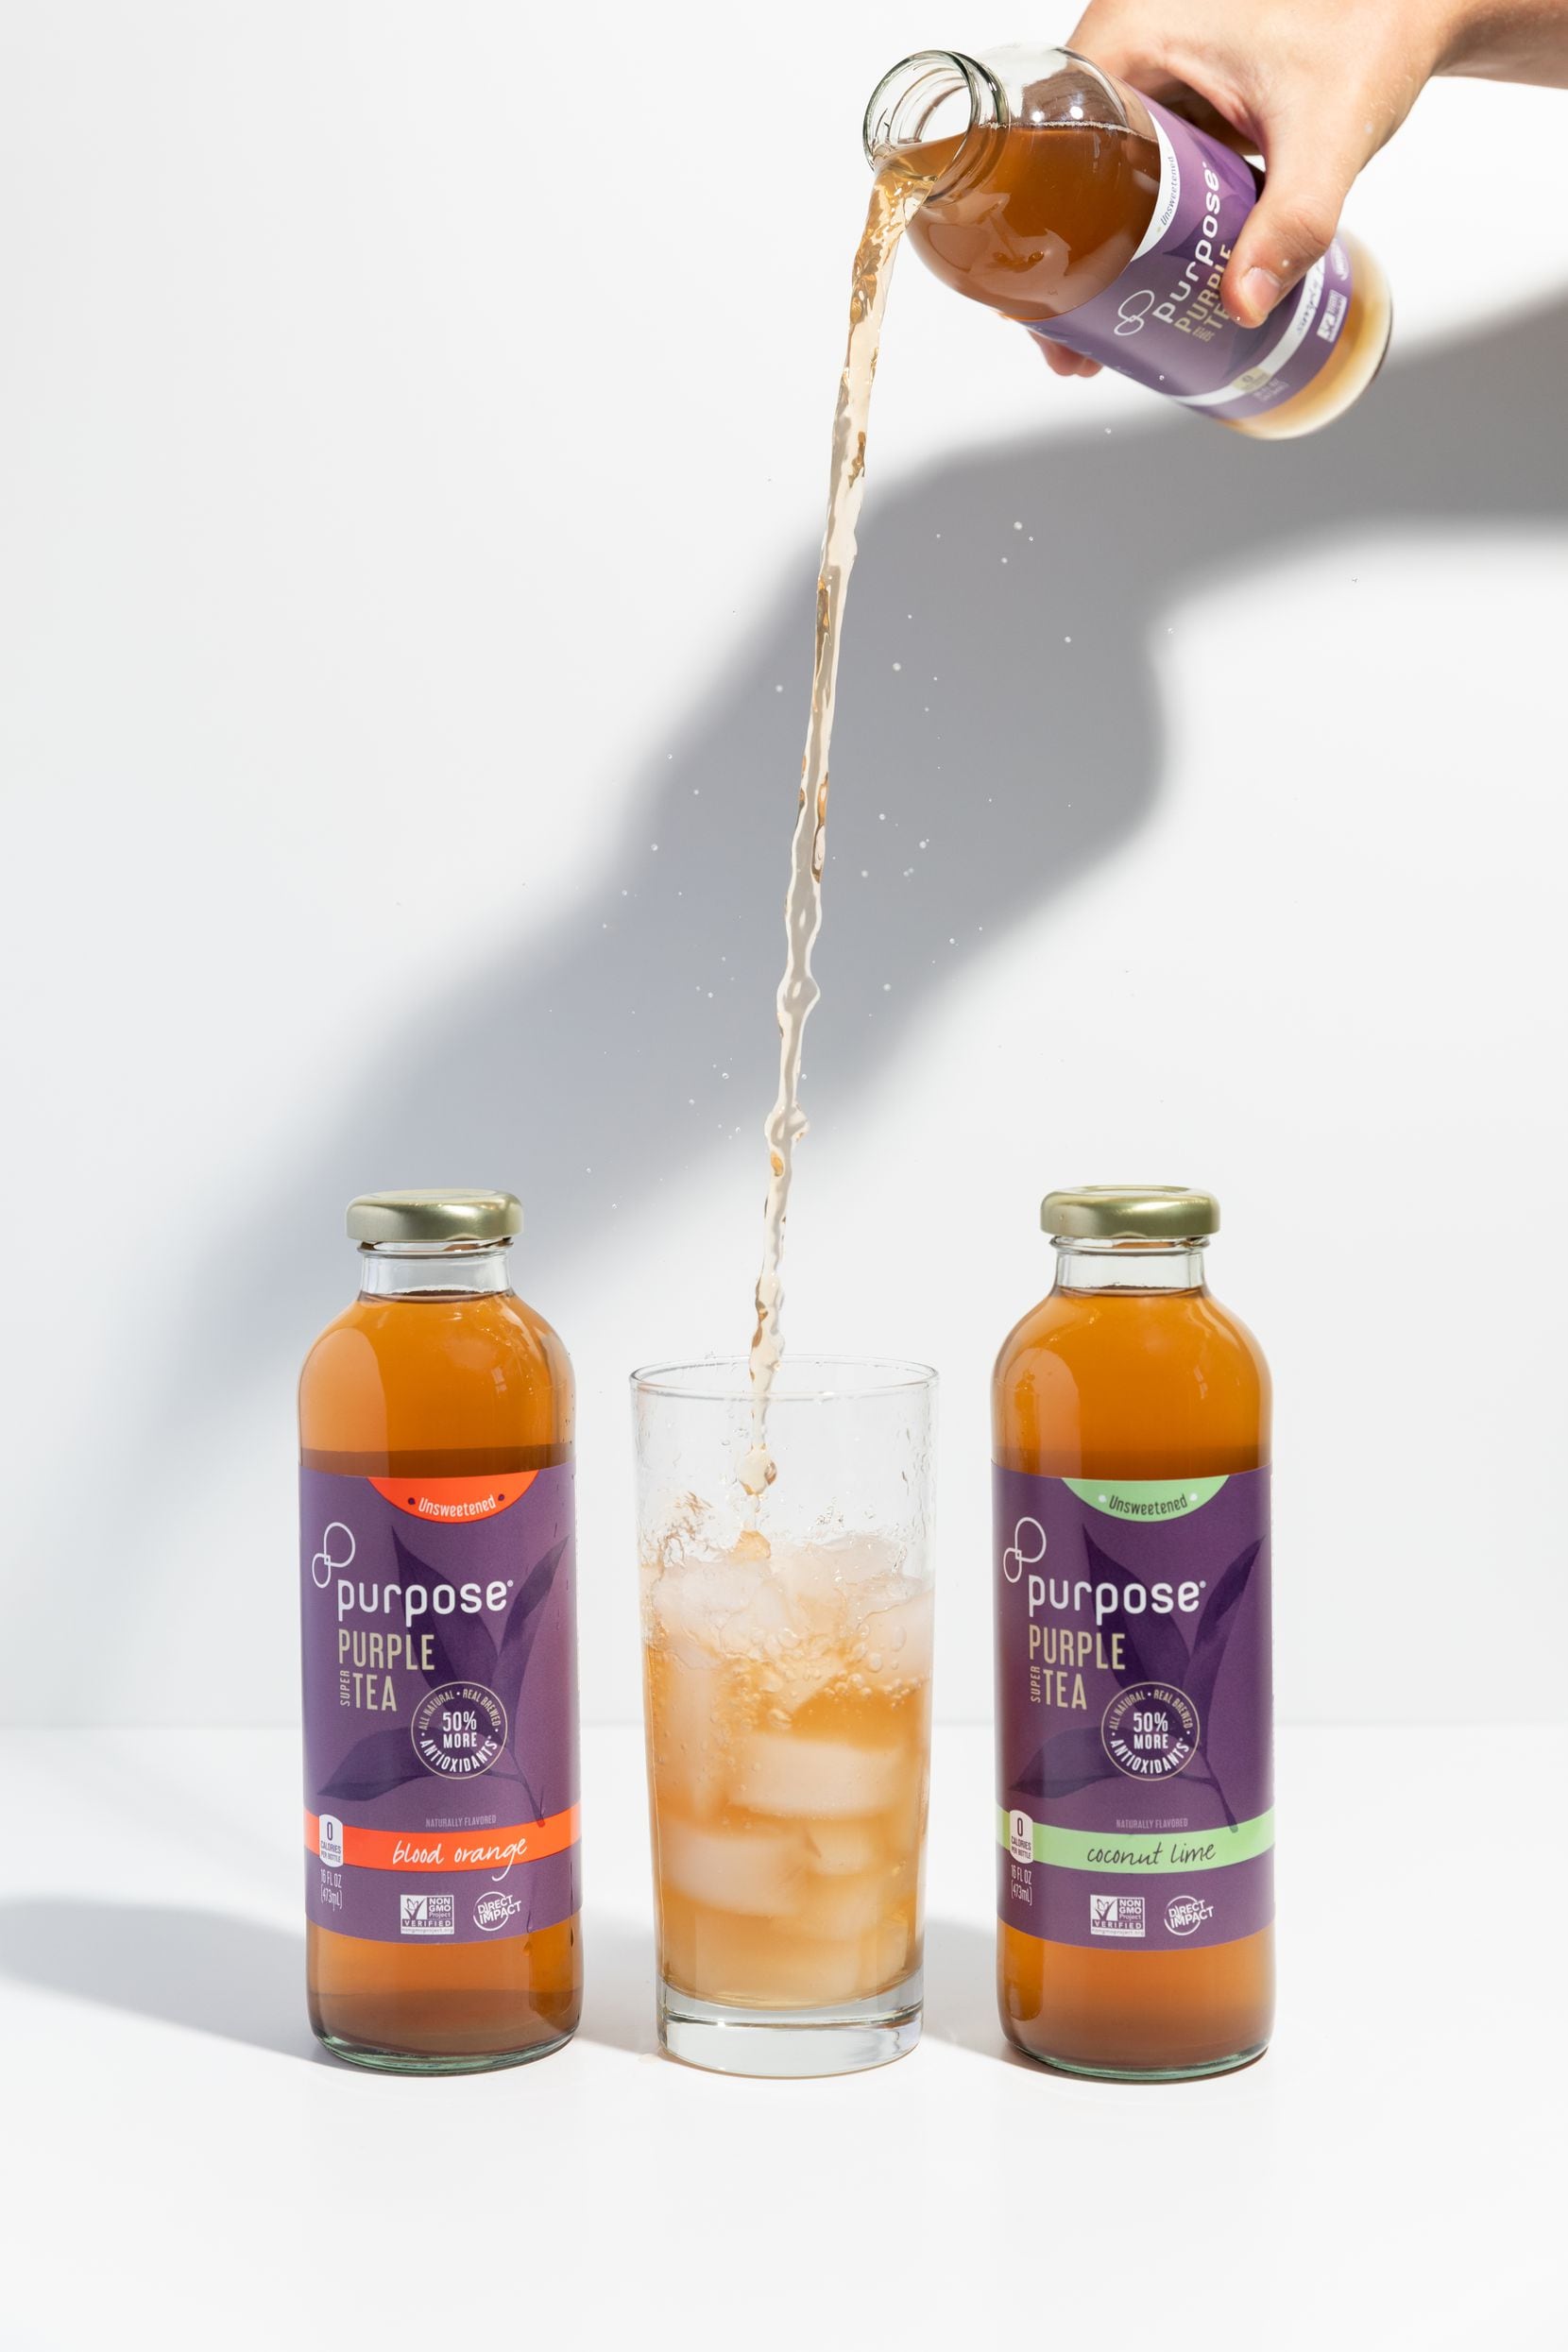 Purpose Tea is a Dallas-based startup beverage brand founded by Chi
Nguyen.